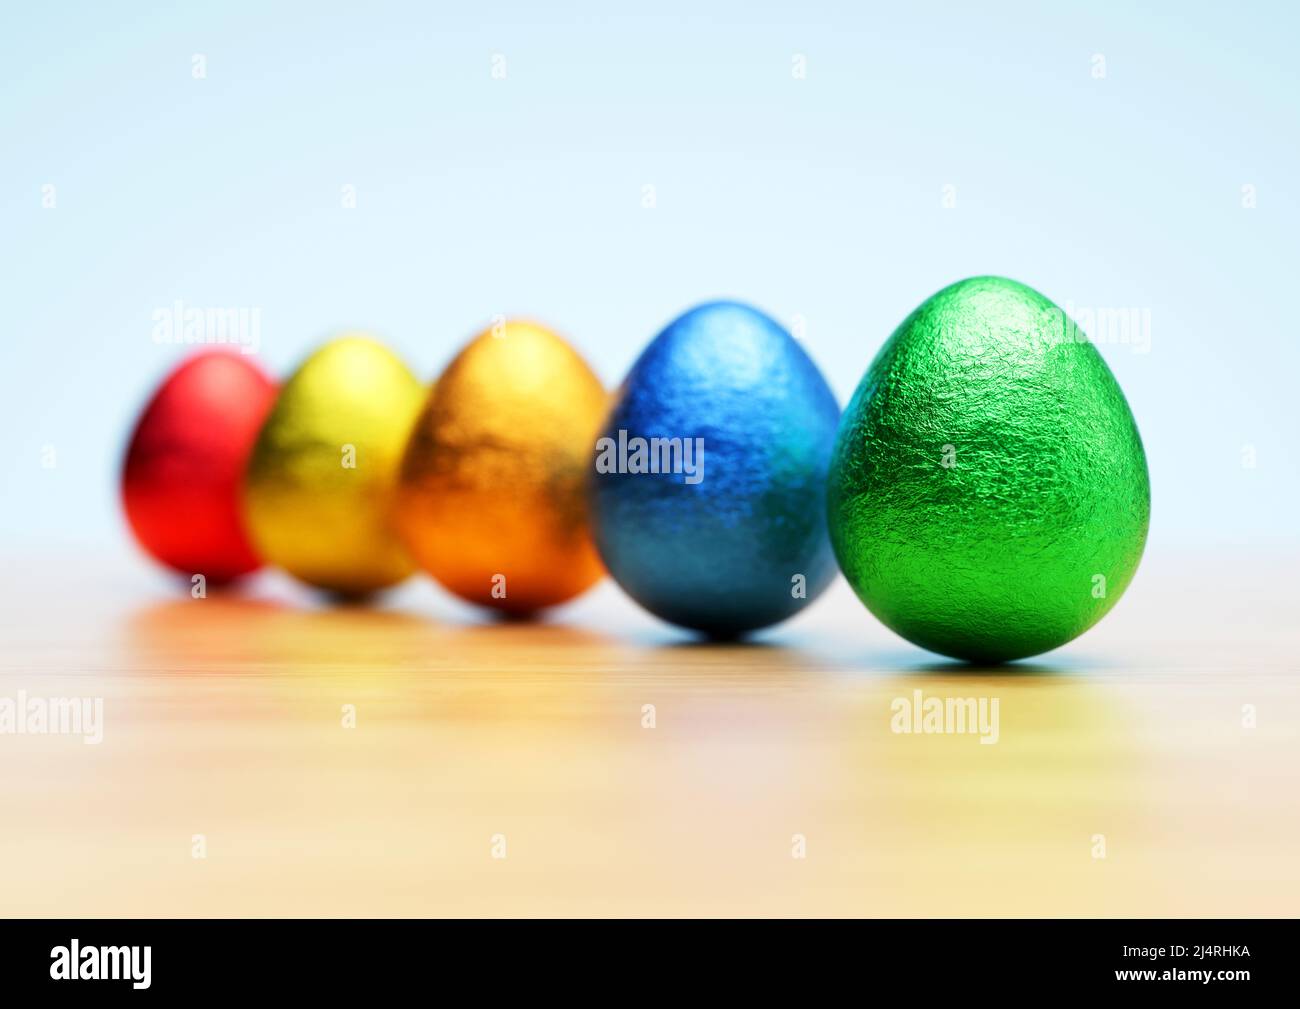 Chocolate easter eggs with shiny Red, yellow, orange, blue and green foil on white background. Close-up. Stock Photo